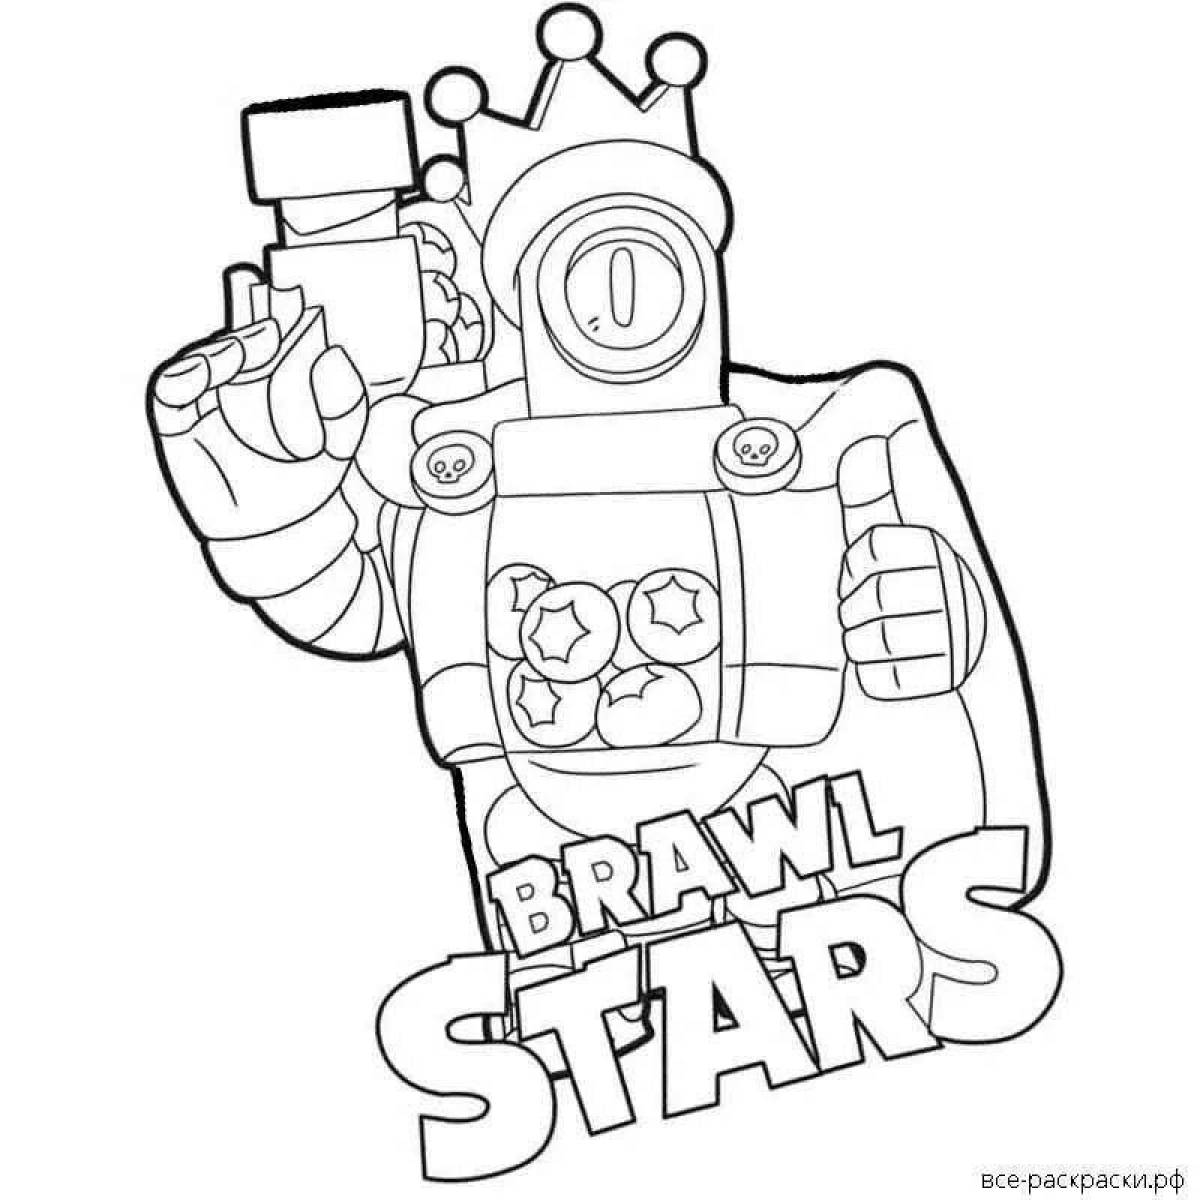 Brilliant bravo stars feng coloring page